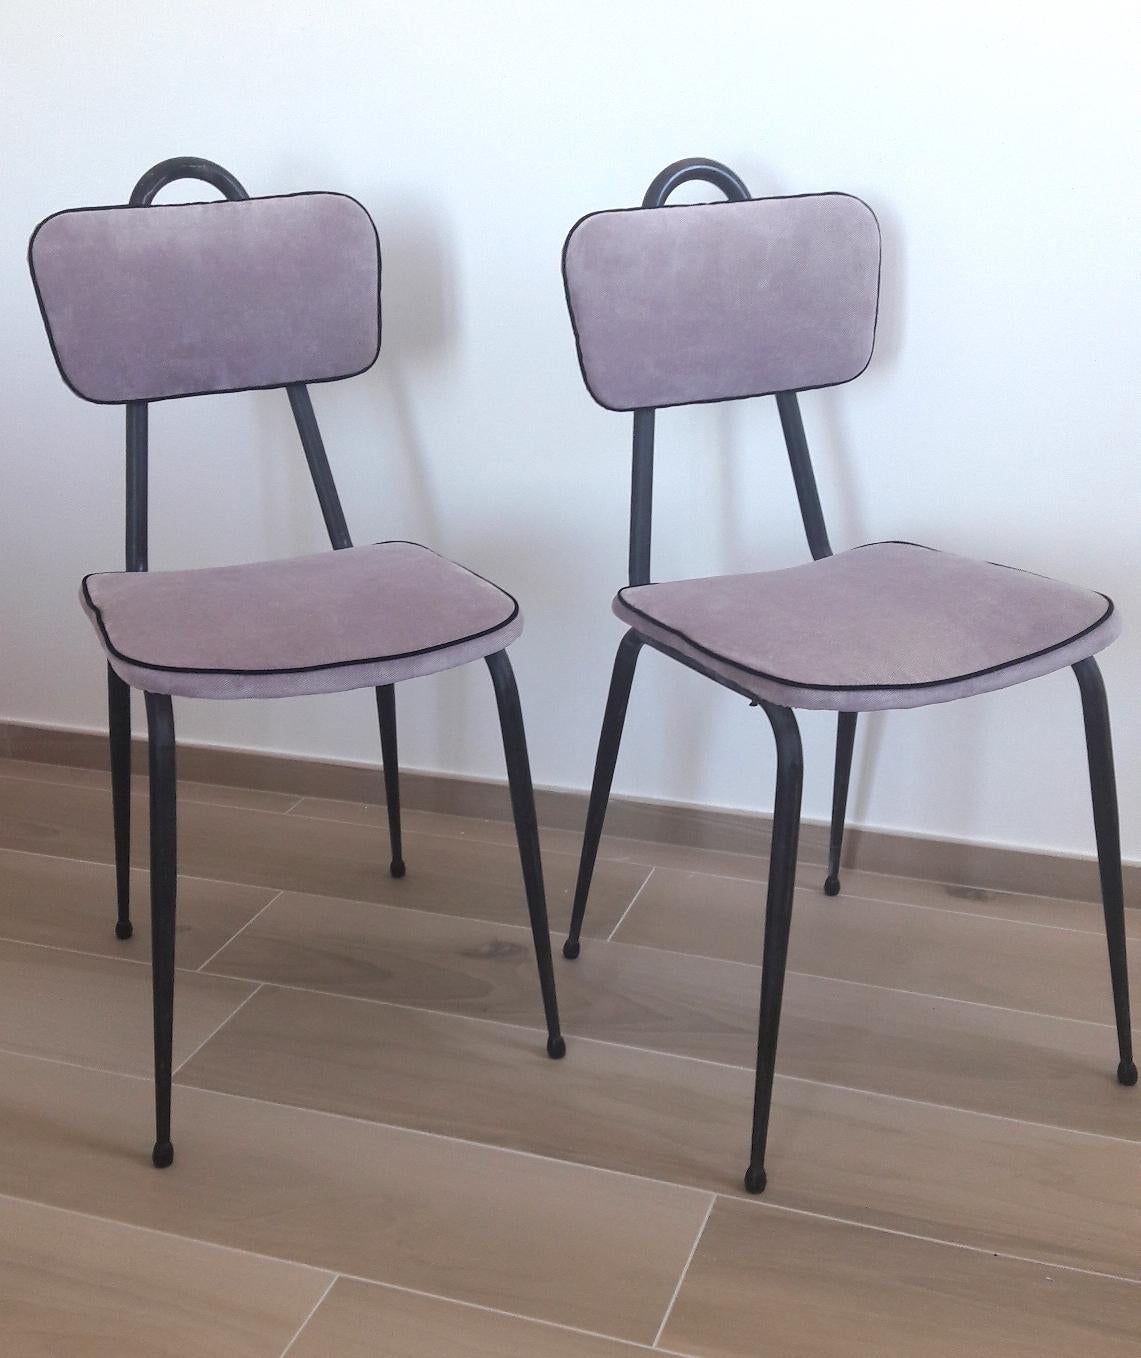 20th Century Mid-Century Modern Pair of Dark Metal and Lilac Velvet Chairs, 1950s For Sale